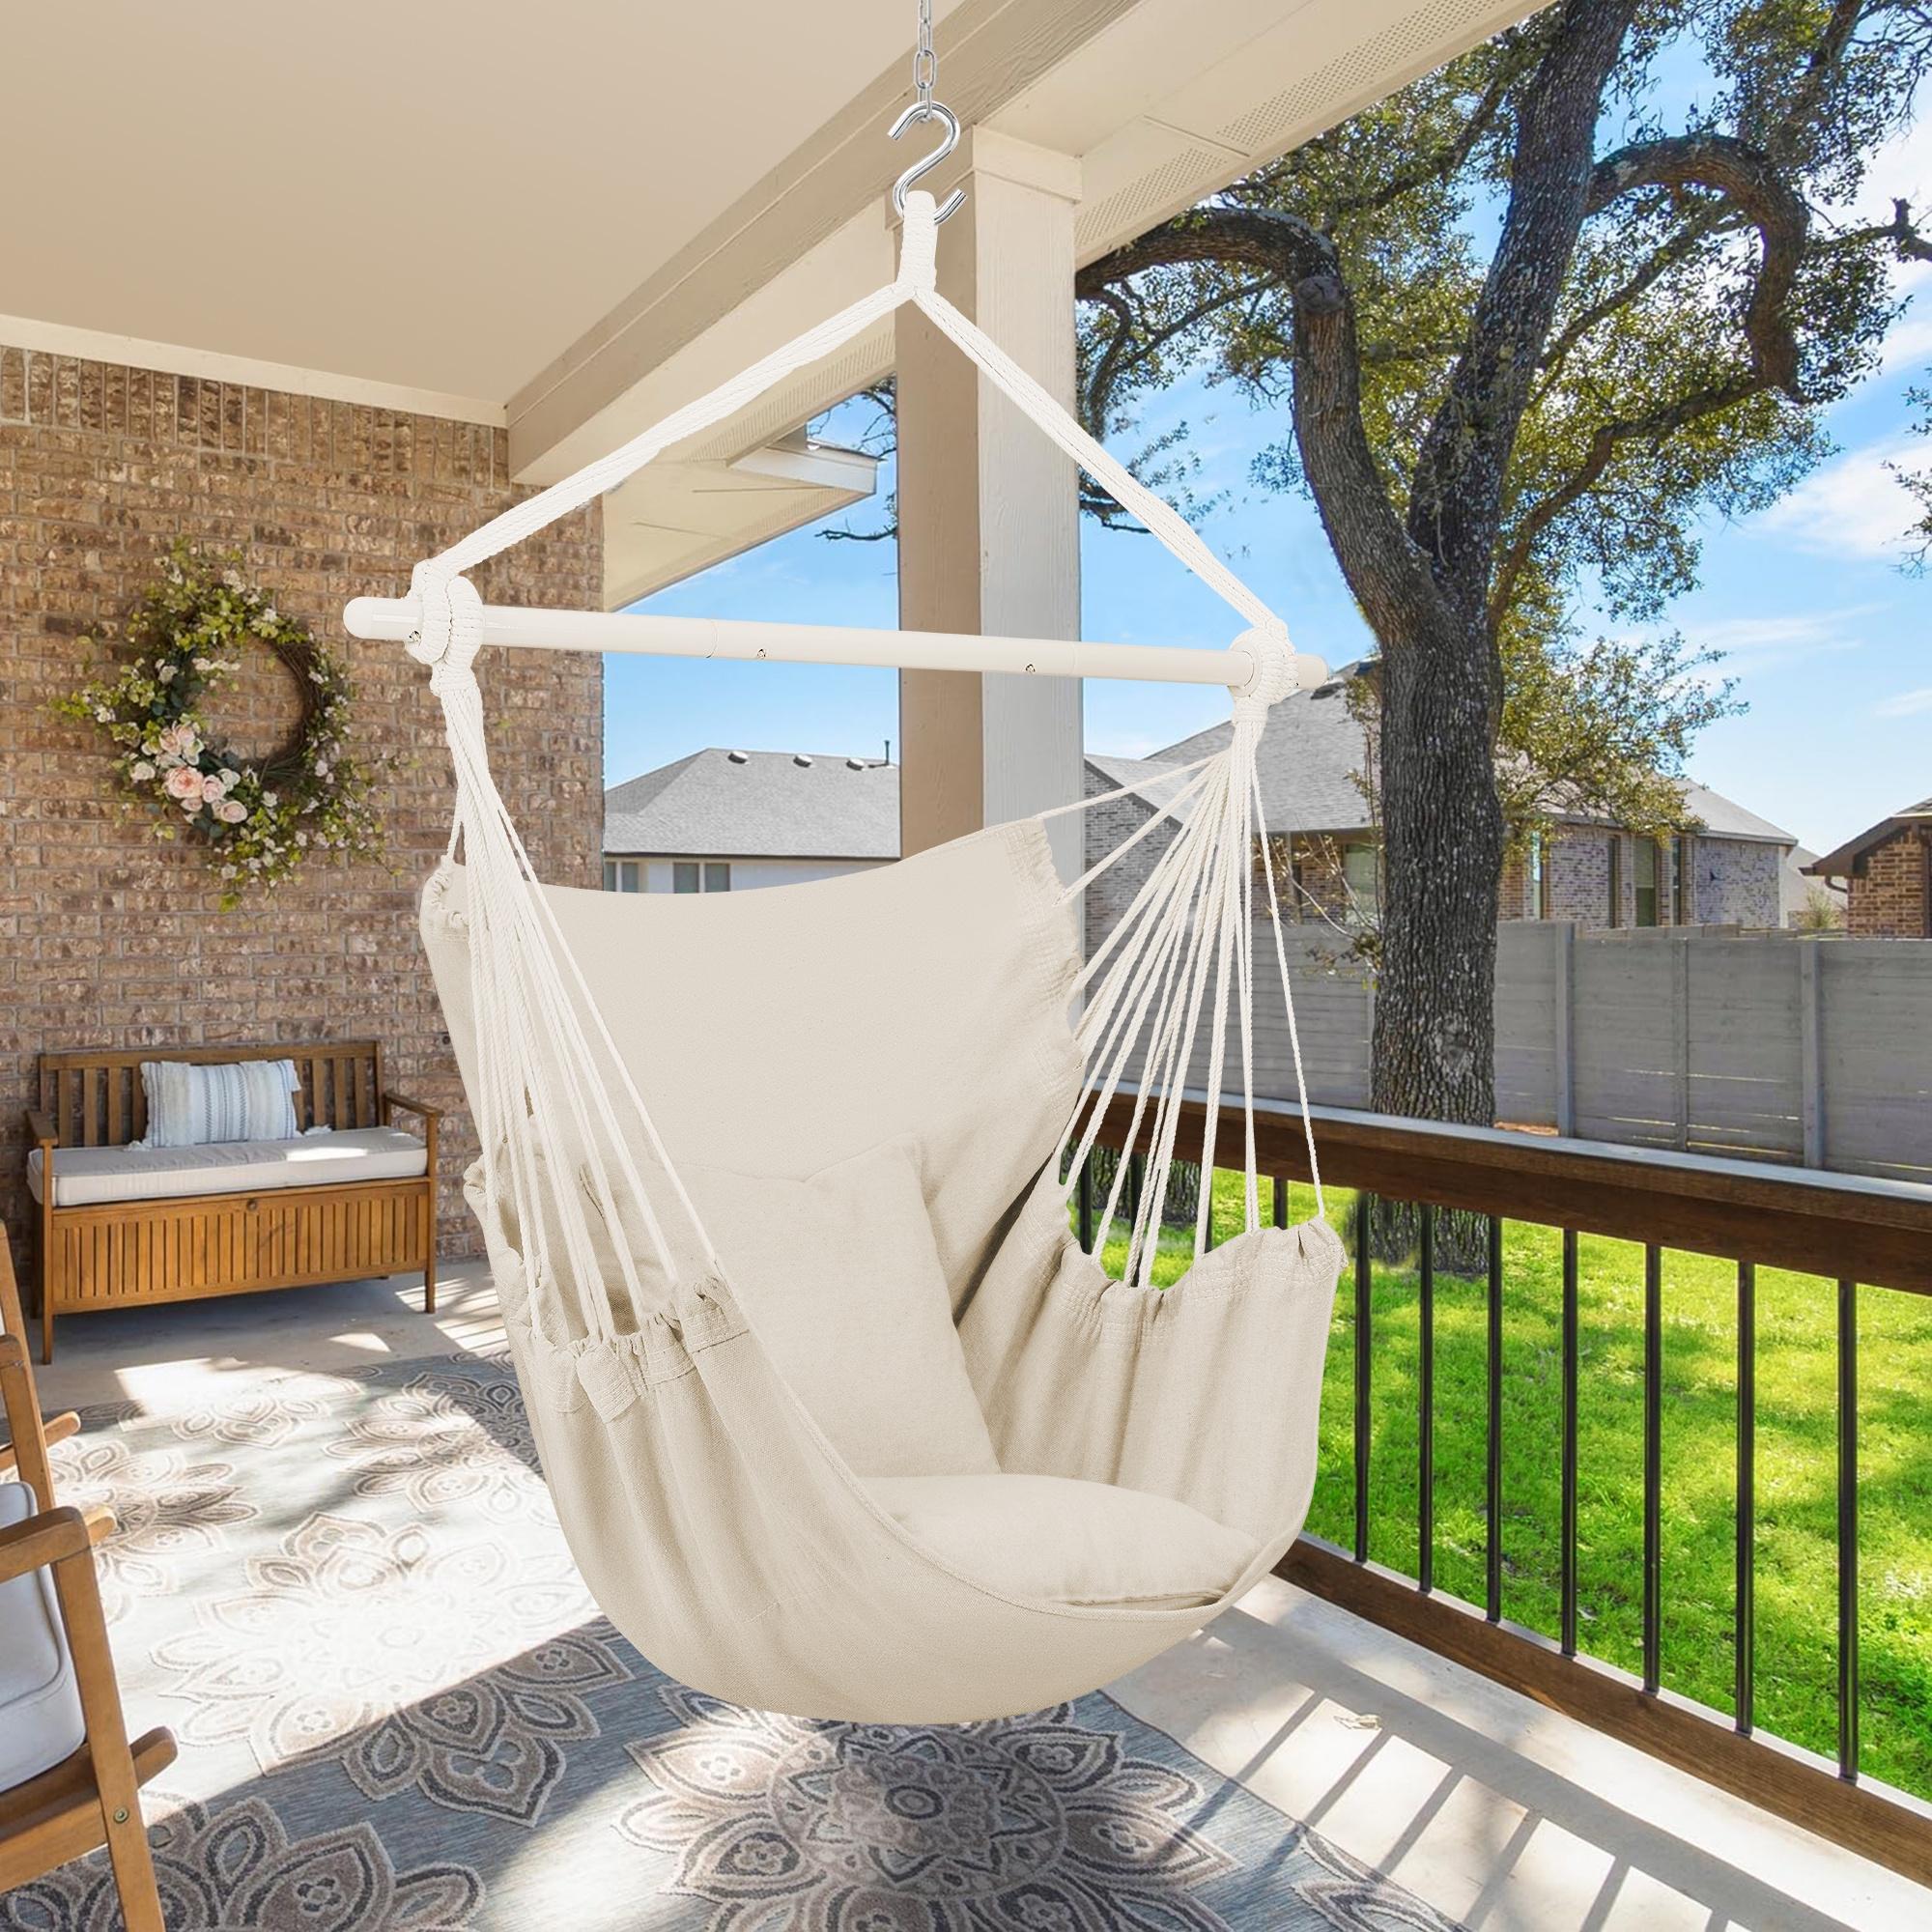 Large Hammock Chair Swing, Relax Hanging Rope Swing Chair with Detachable Metal Support Bar & Two Seat Cushions, Cotton Hammock Chair Swing Seat for Yard Bedroom Patio Porch Indoor Outdoor - image 1 of 9